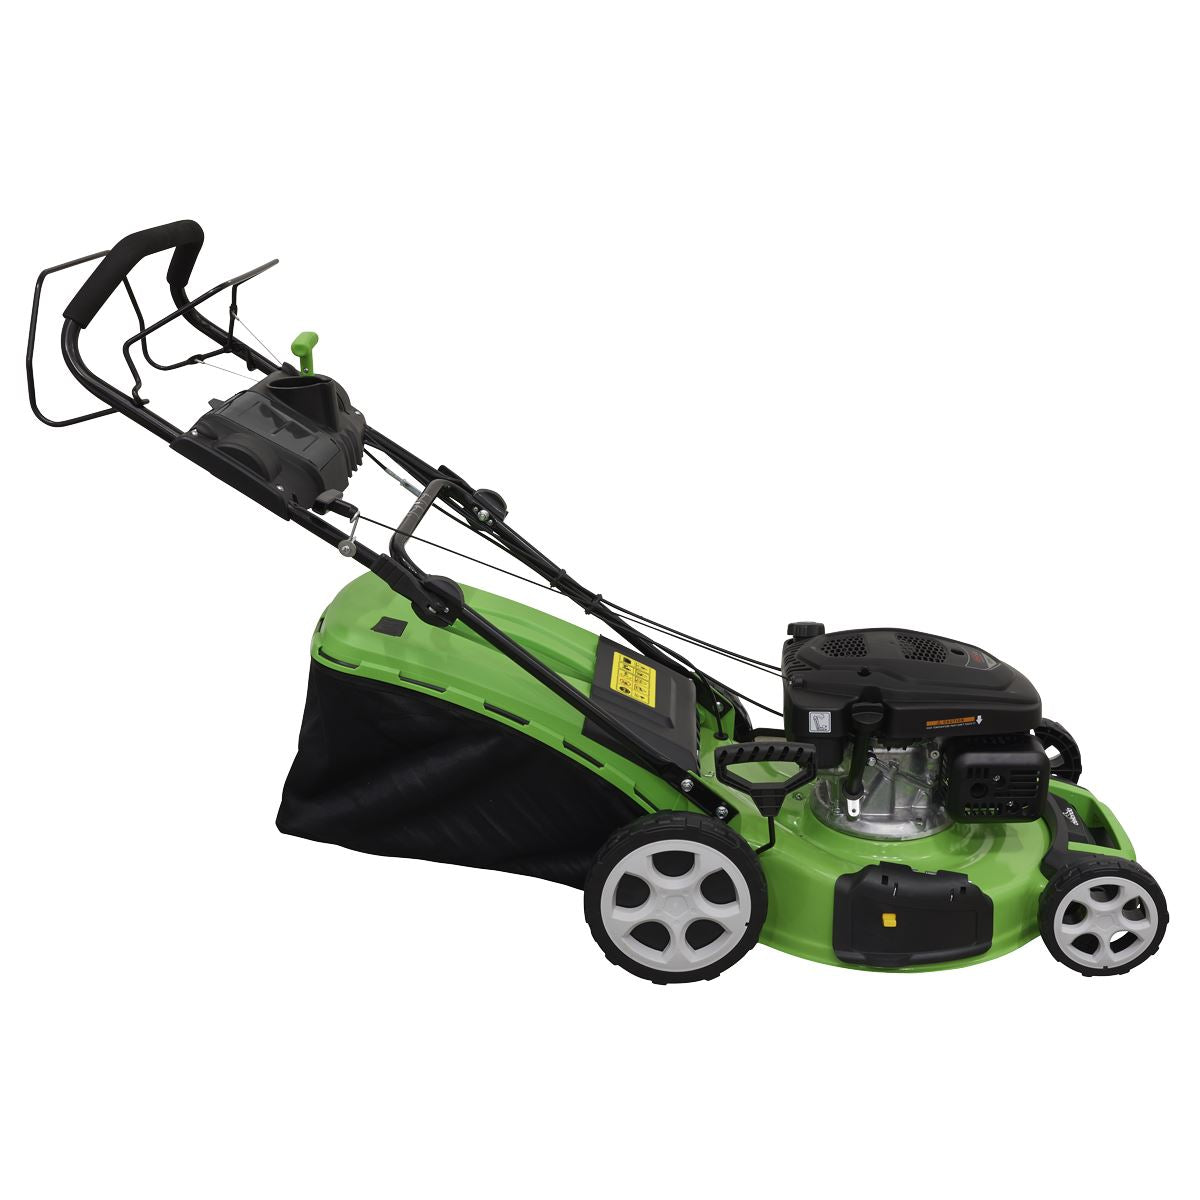 Dellonda Self-Propelled Petrol Lawnmower Grass Cutter with Height Adjustment & Grass Bag 171cc 20"/51cm 4-Stroke Engine